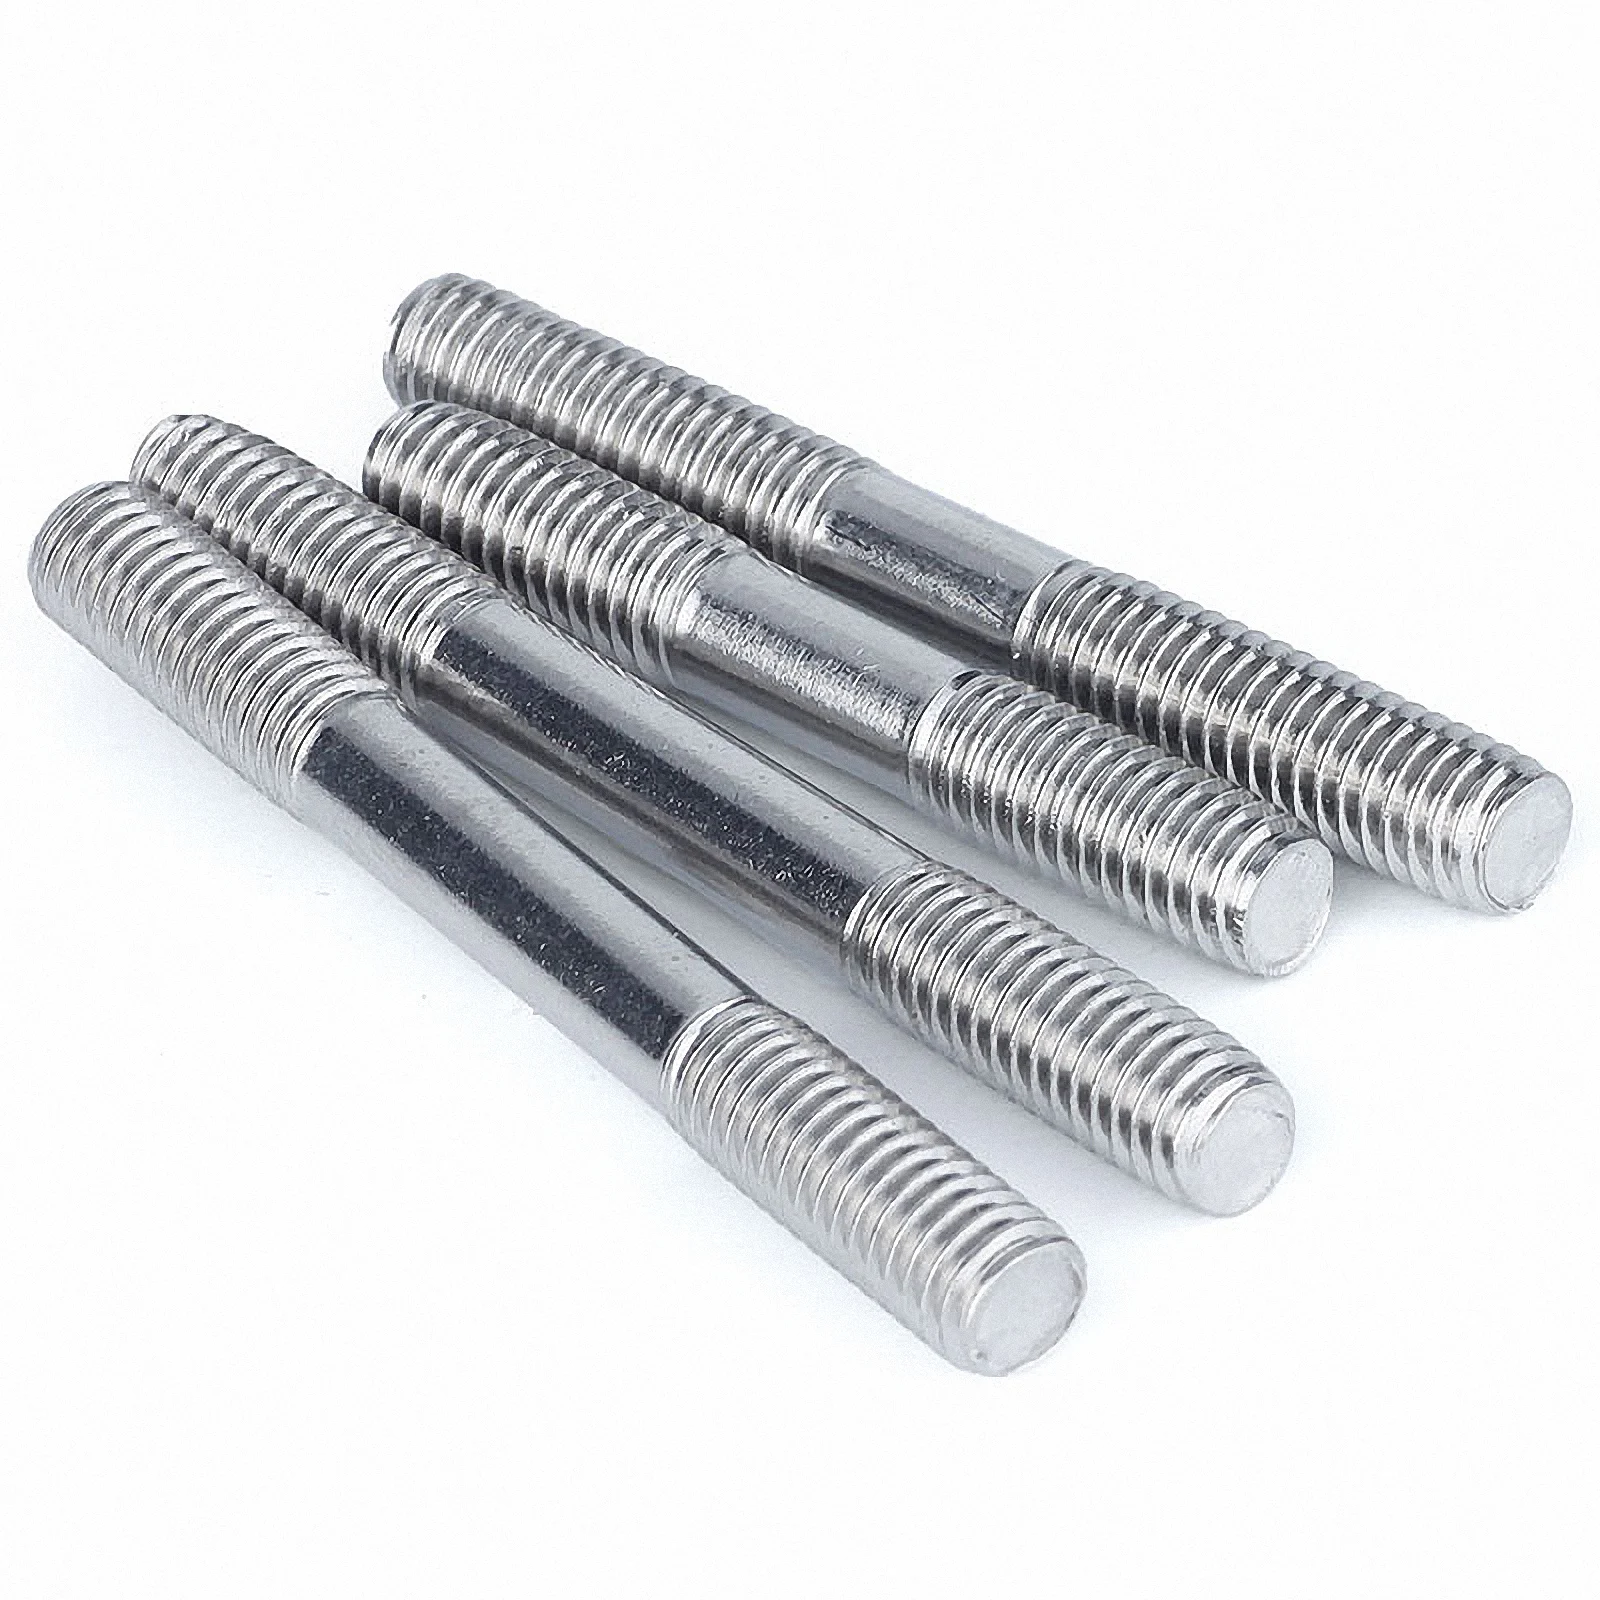 Bar M6 M8 M10 M12 Double End Threaded Stud Rod Bolts A4 316 Stainless Steel 